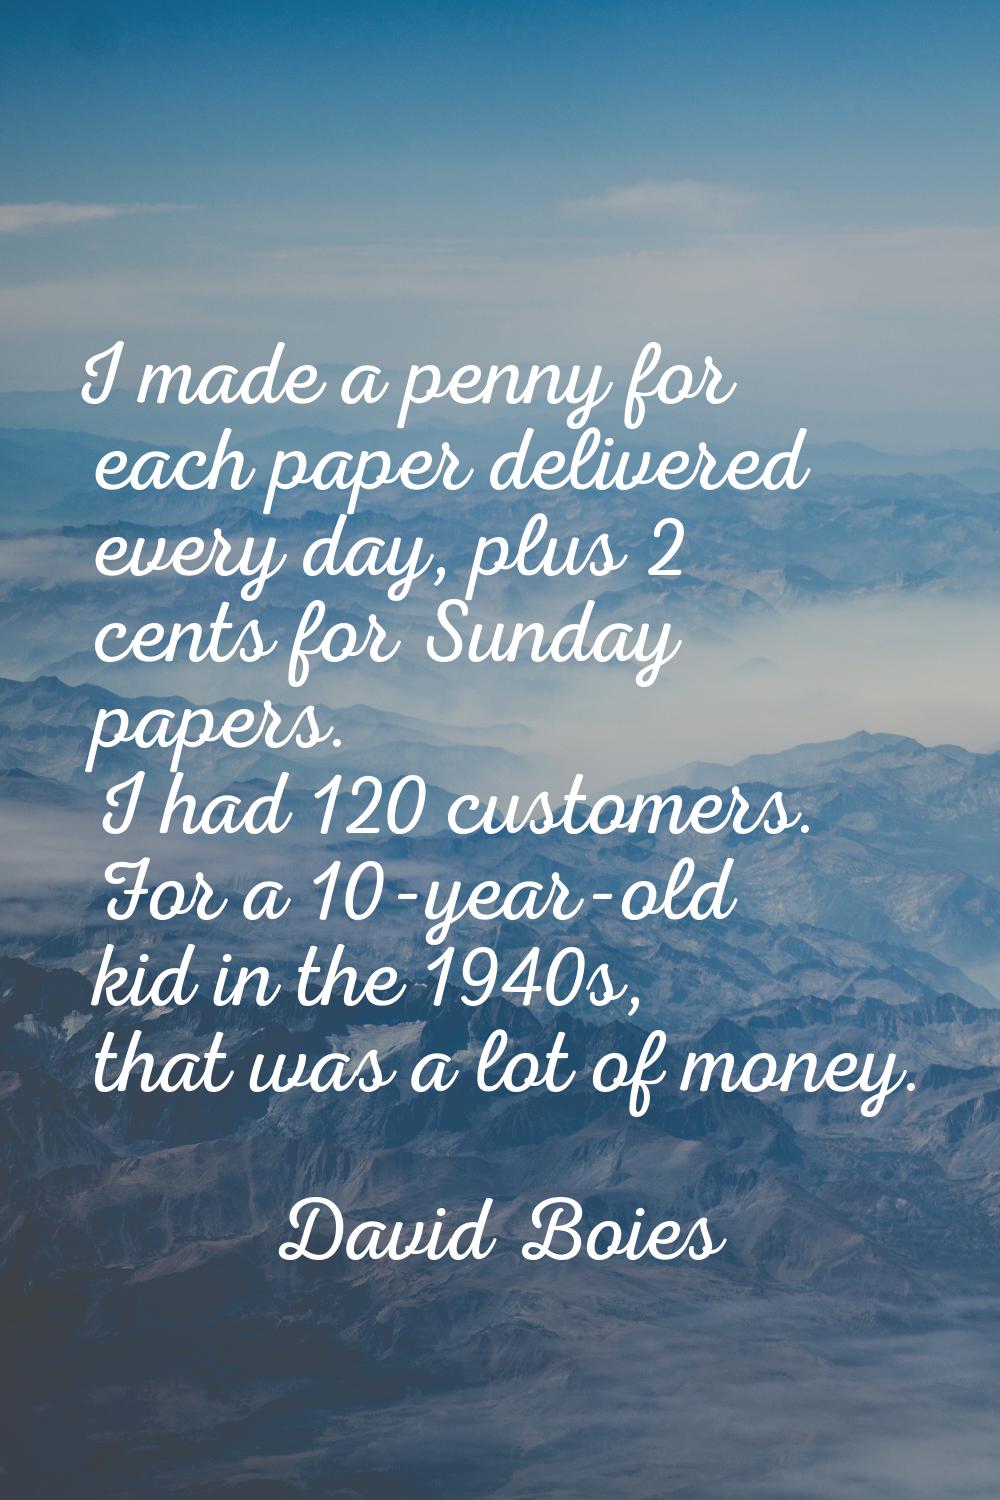 I made a penny for each paper delivered every day, plus 2 cents for Sunday papers. I had 120 custom